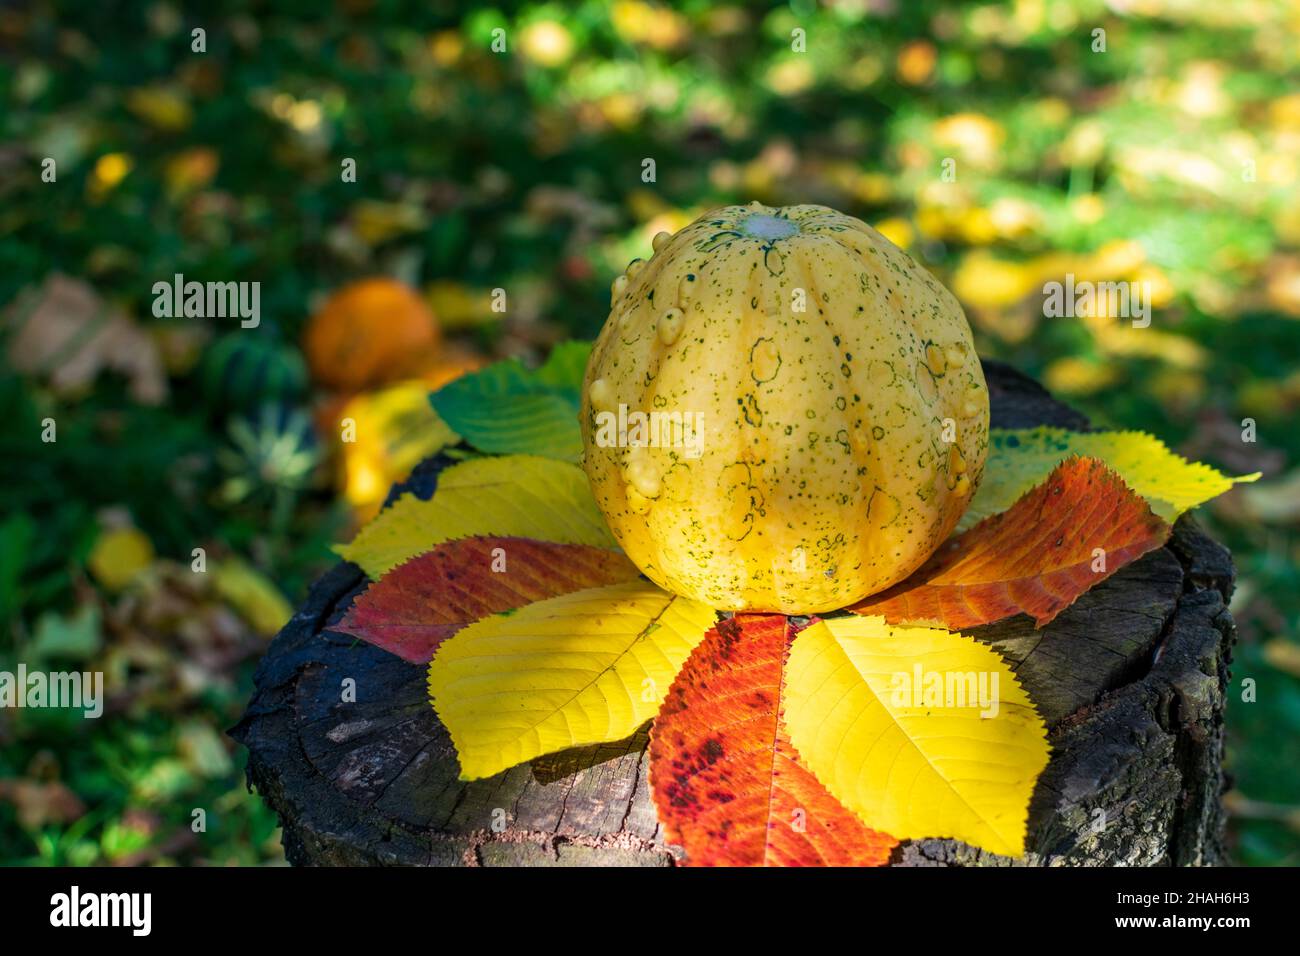 Yellow gourd or pumpkin with orange stripes on a wooden table covered by autumn colored leaves enlightened by sunset Stock Photo